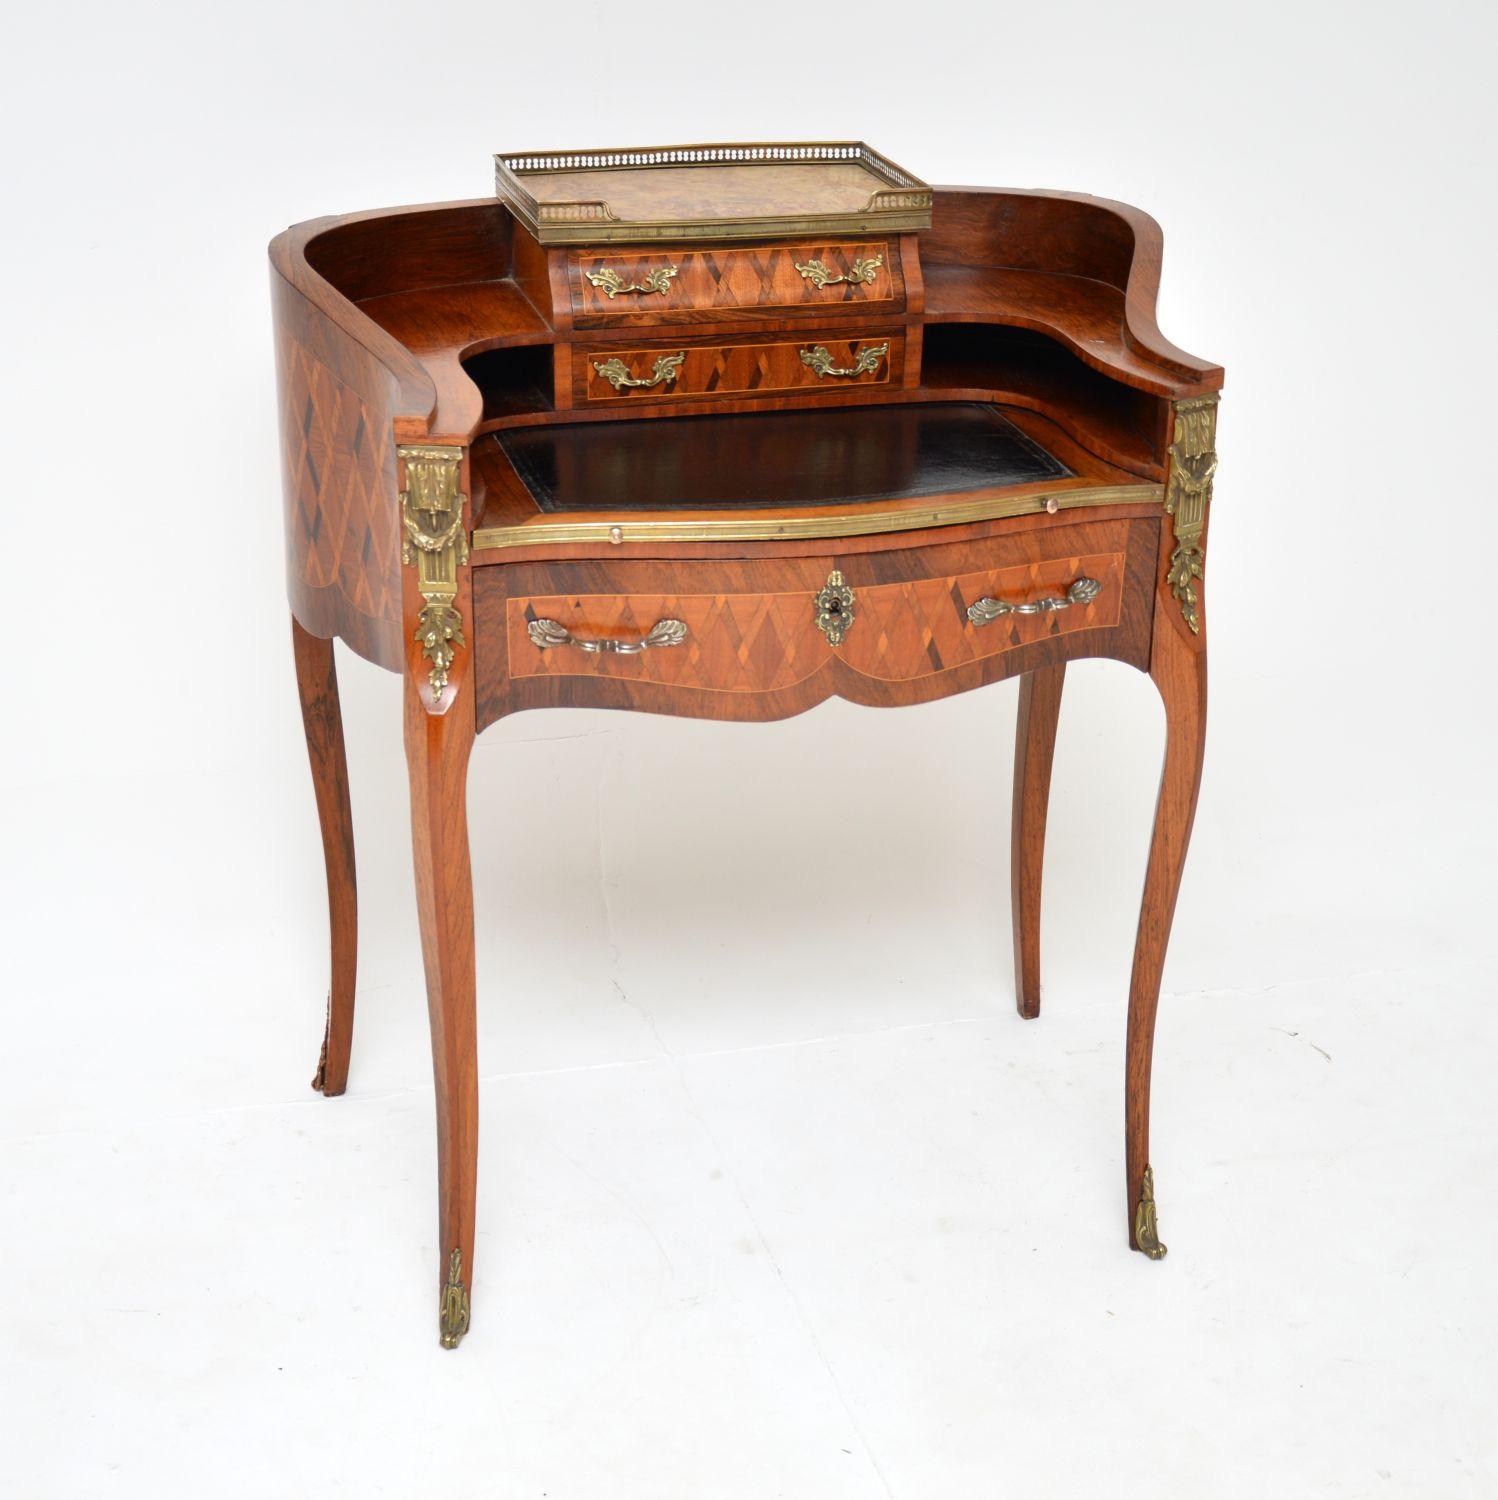 An absolutely stunning antique French compact desk also known as an escritoire, with a wonderful shape. This was made in France and dates from around the 1920’s period.

The quality is outstanding, this has many extremely beautiful features. It is